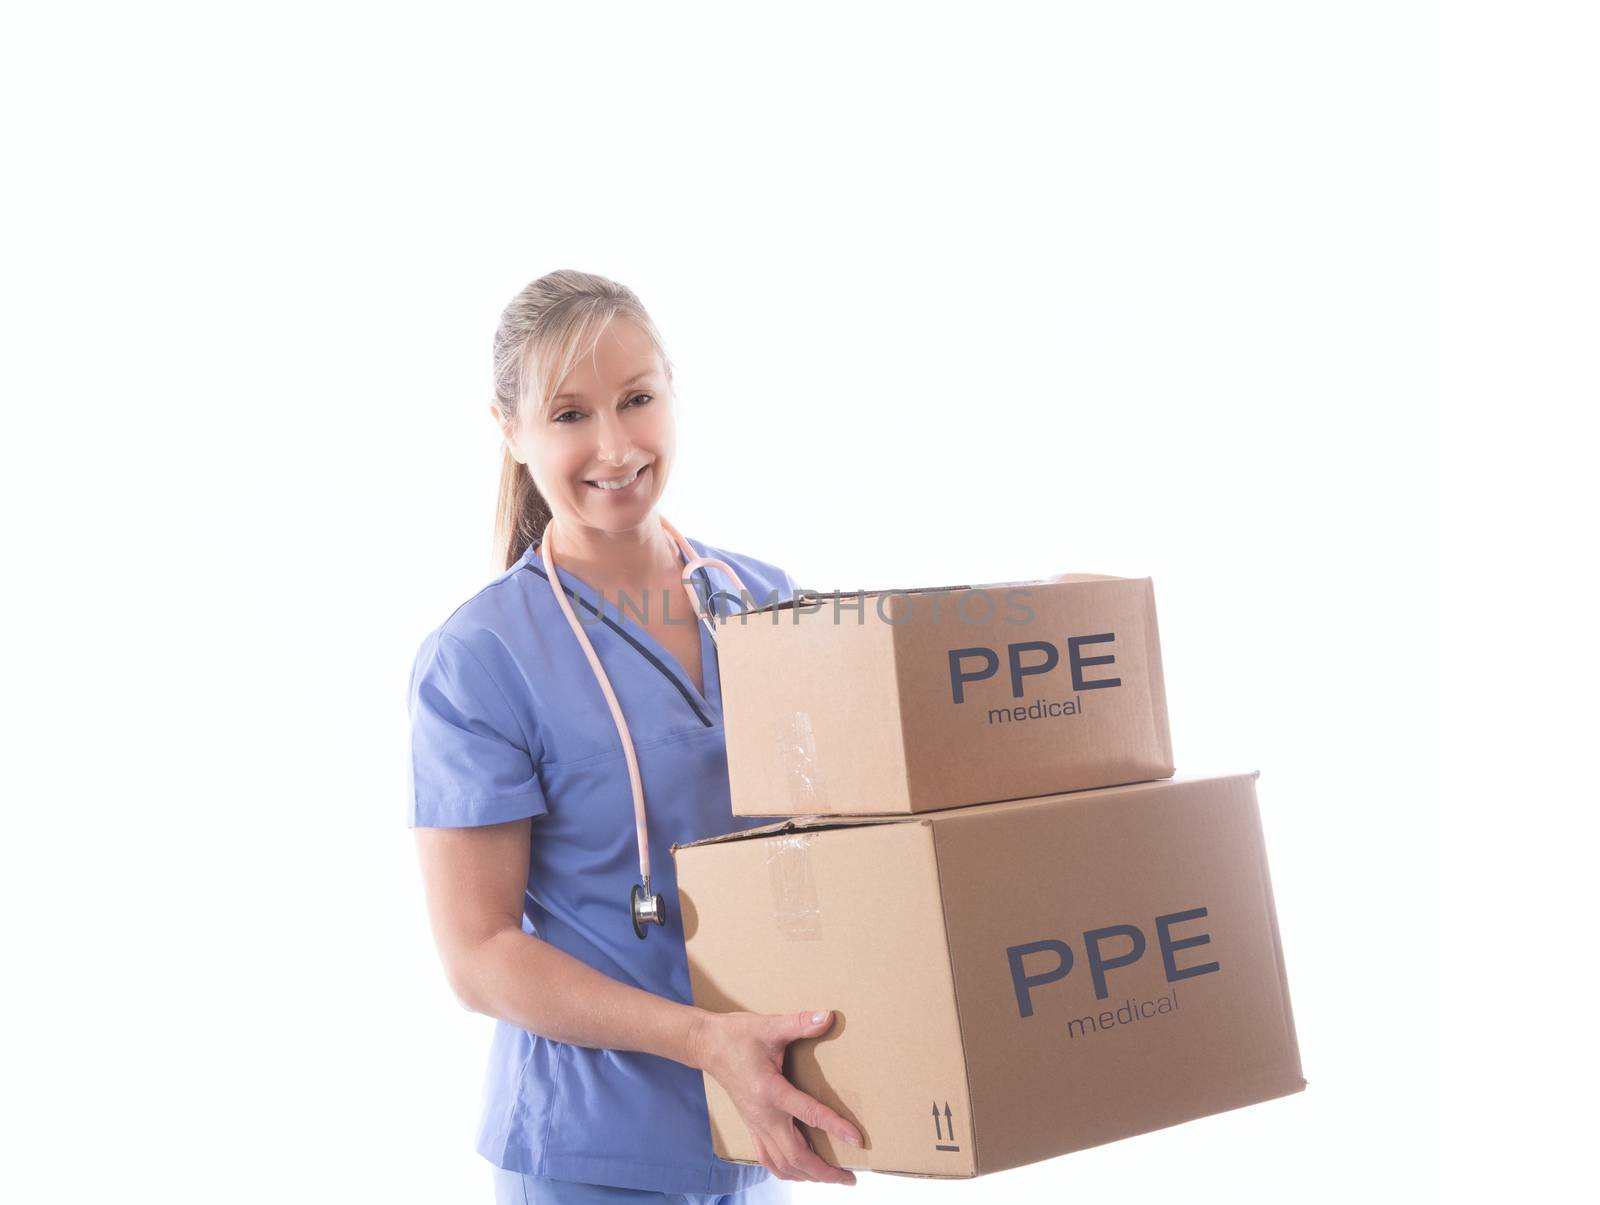 Nurse or healthcare worker holding boxes of PPE or medical equip by lovleah